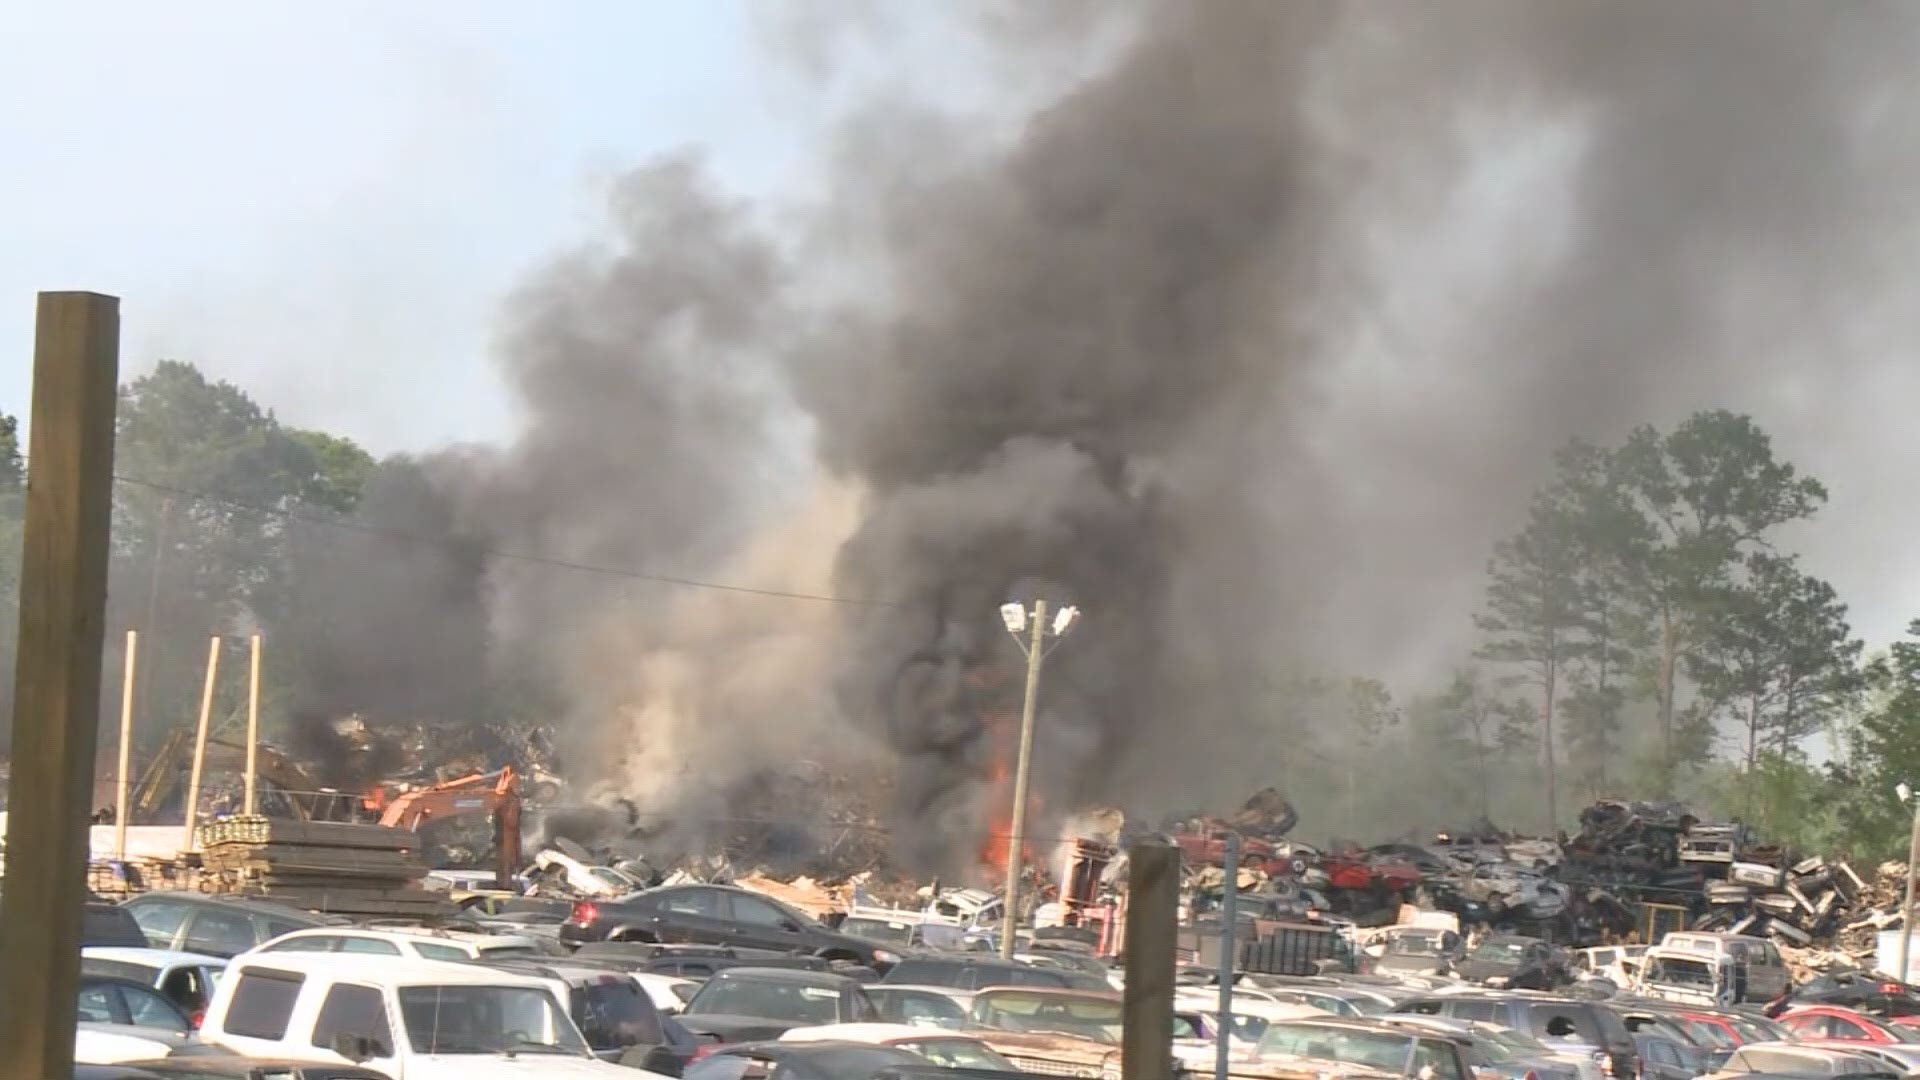 The fire was at Auto Salvage LLC at 7716 Fairfield Road.